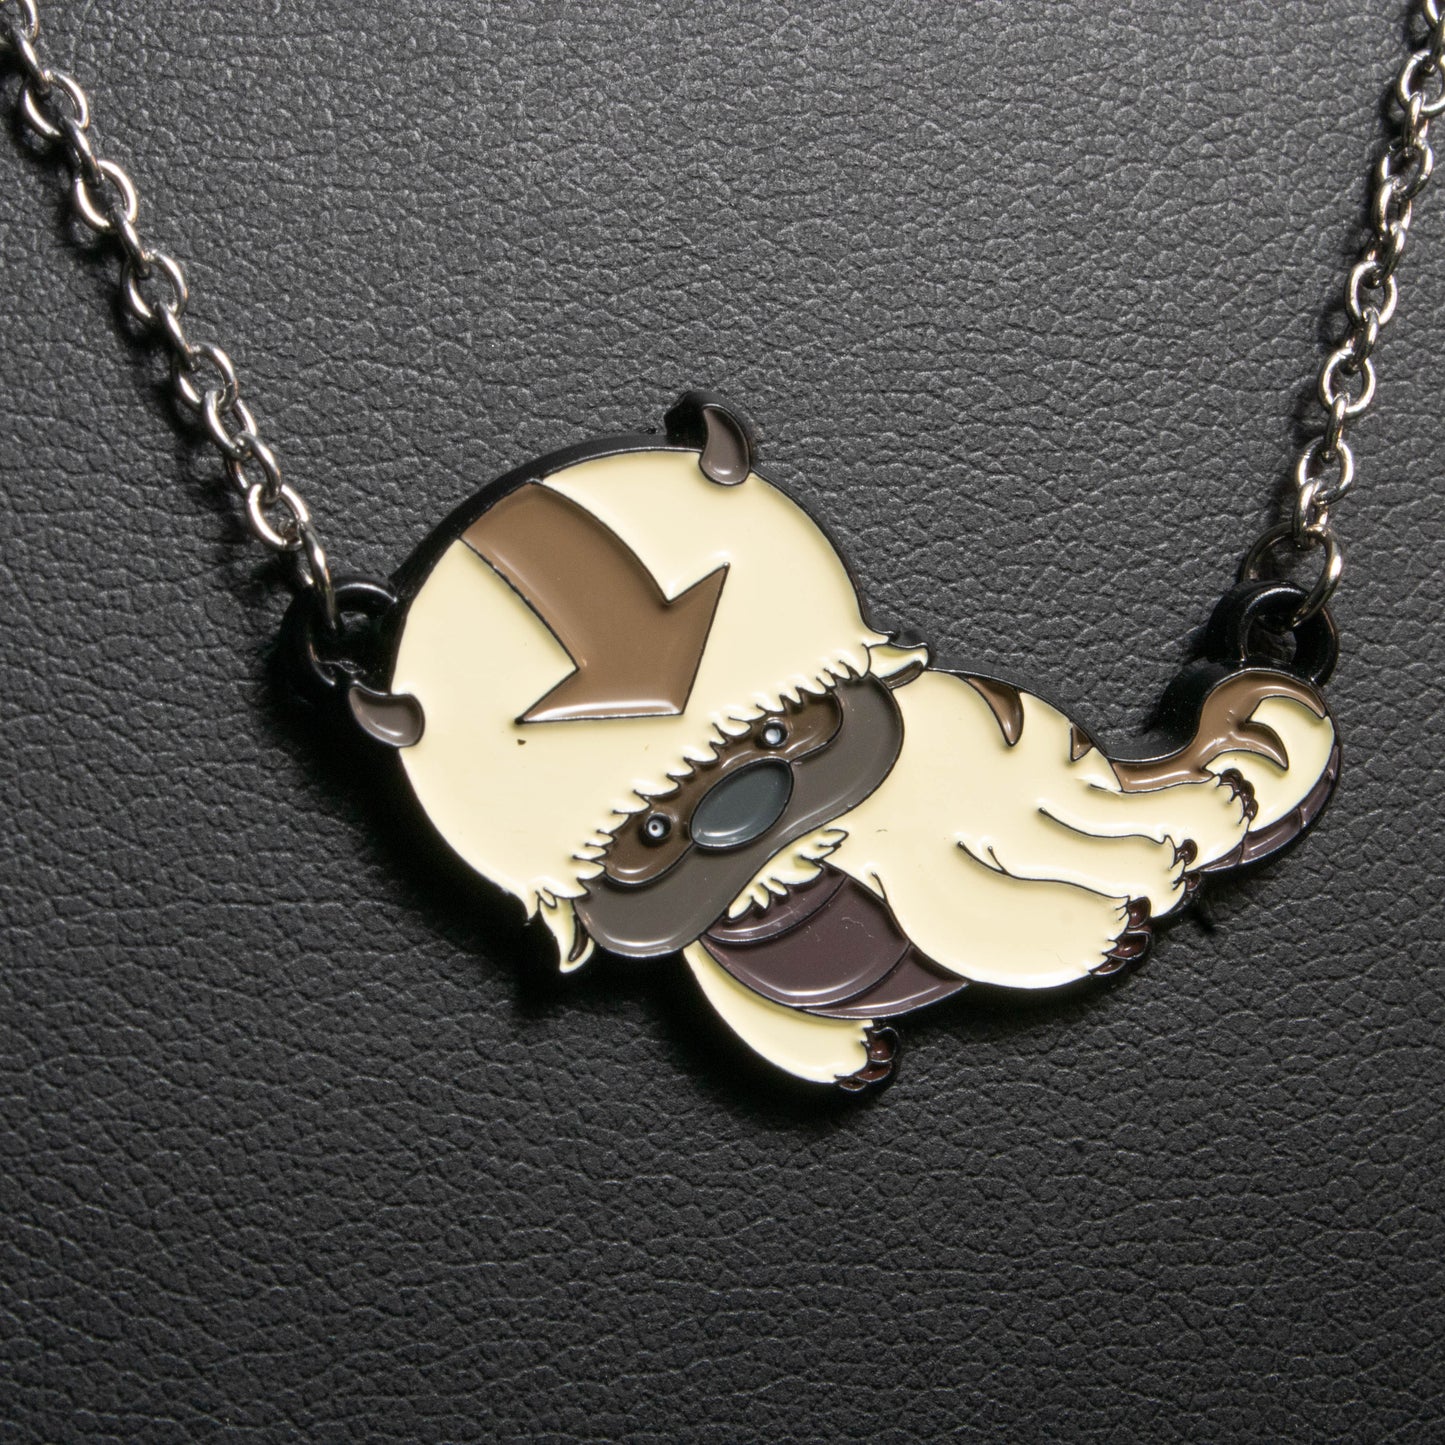 Load image into Gallery viewer, Appa (Avatar: The Last Airbender) Enamel Necklace
